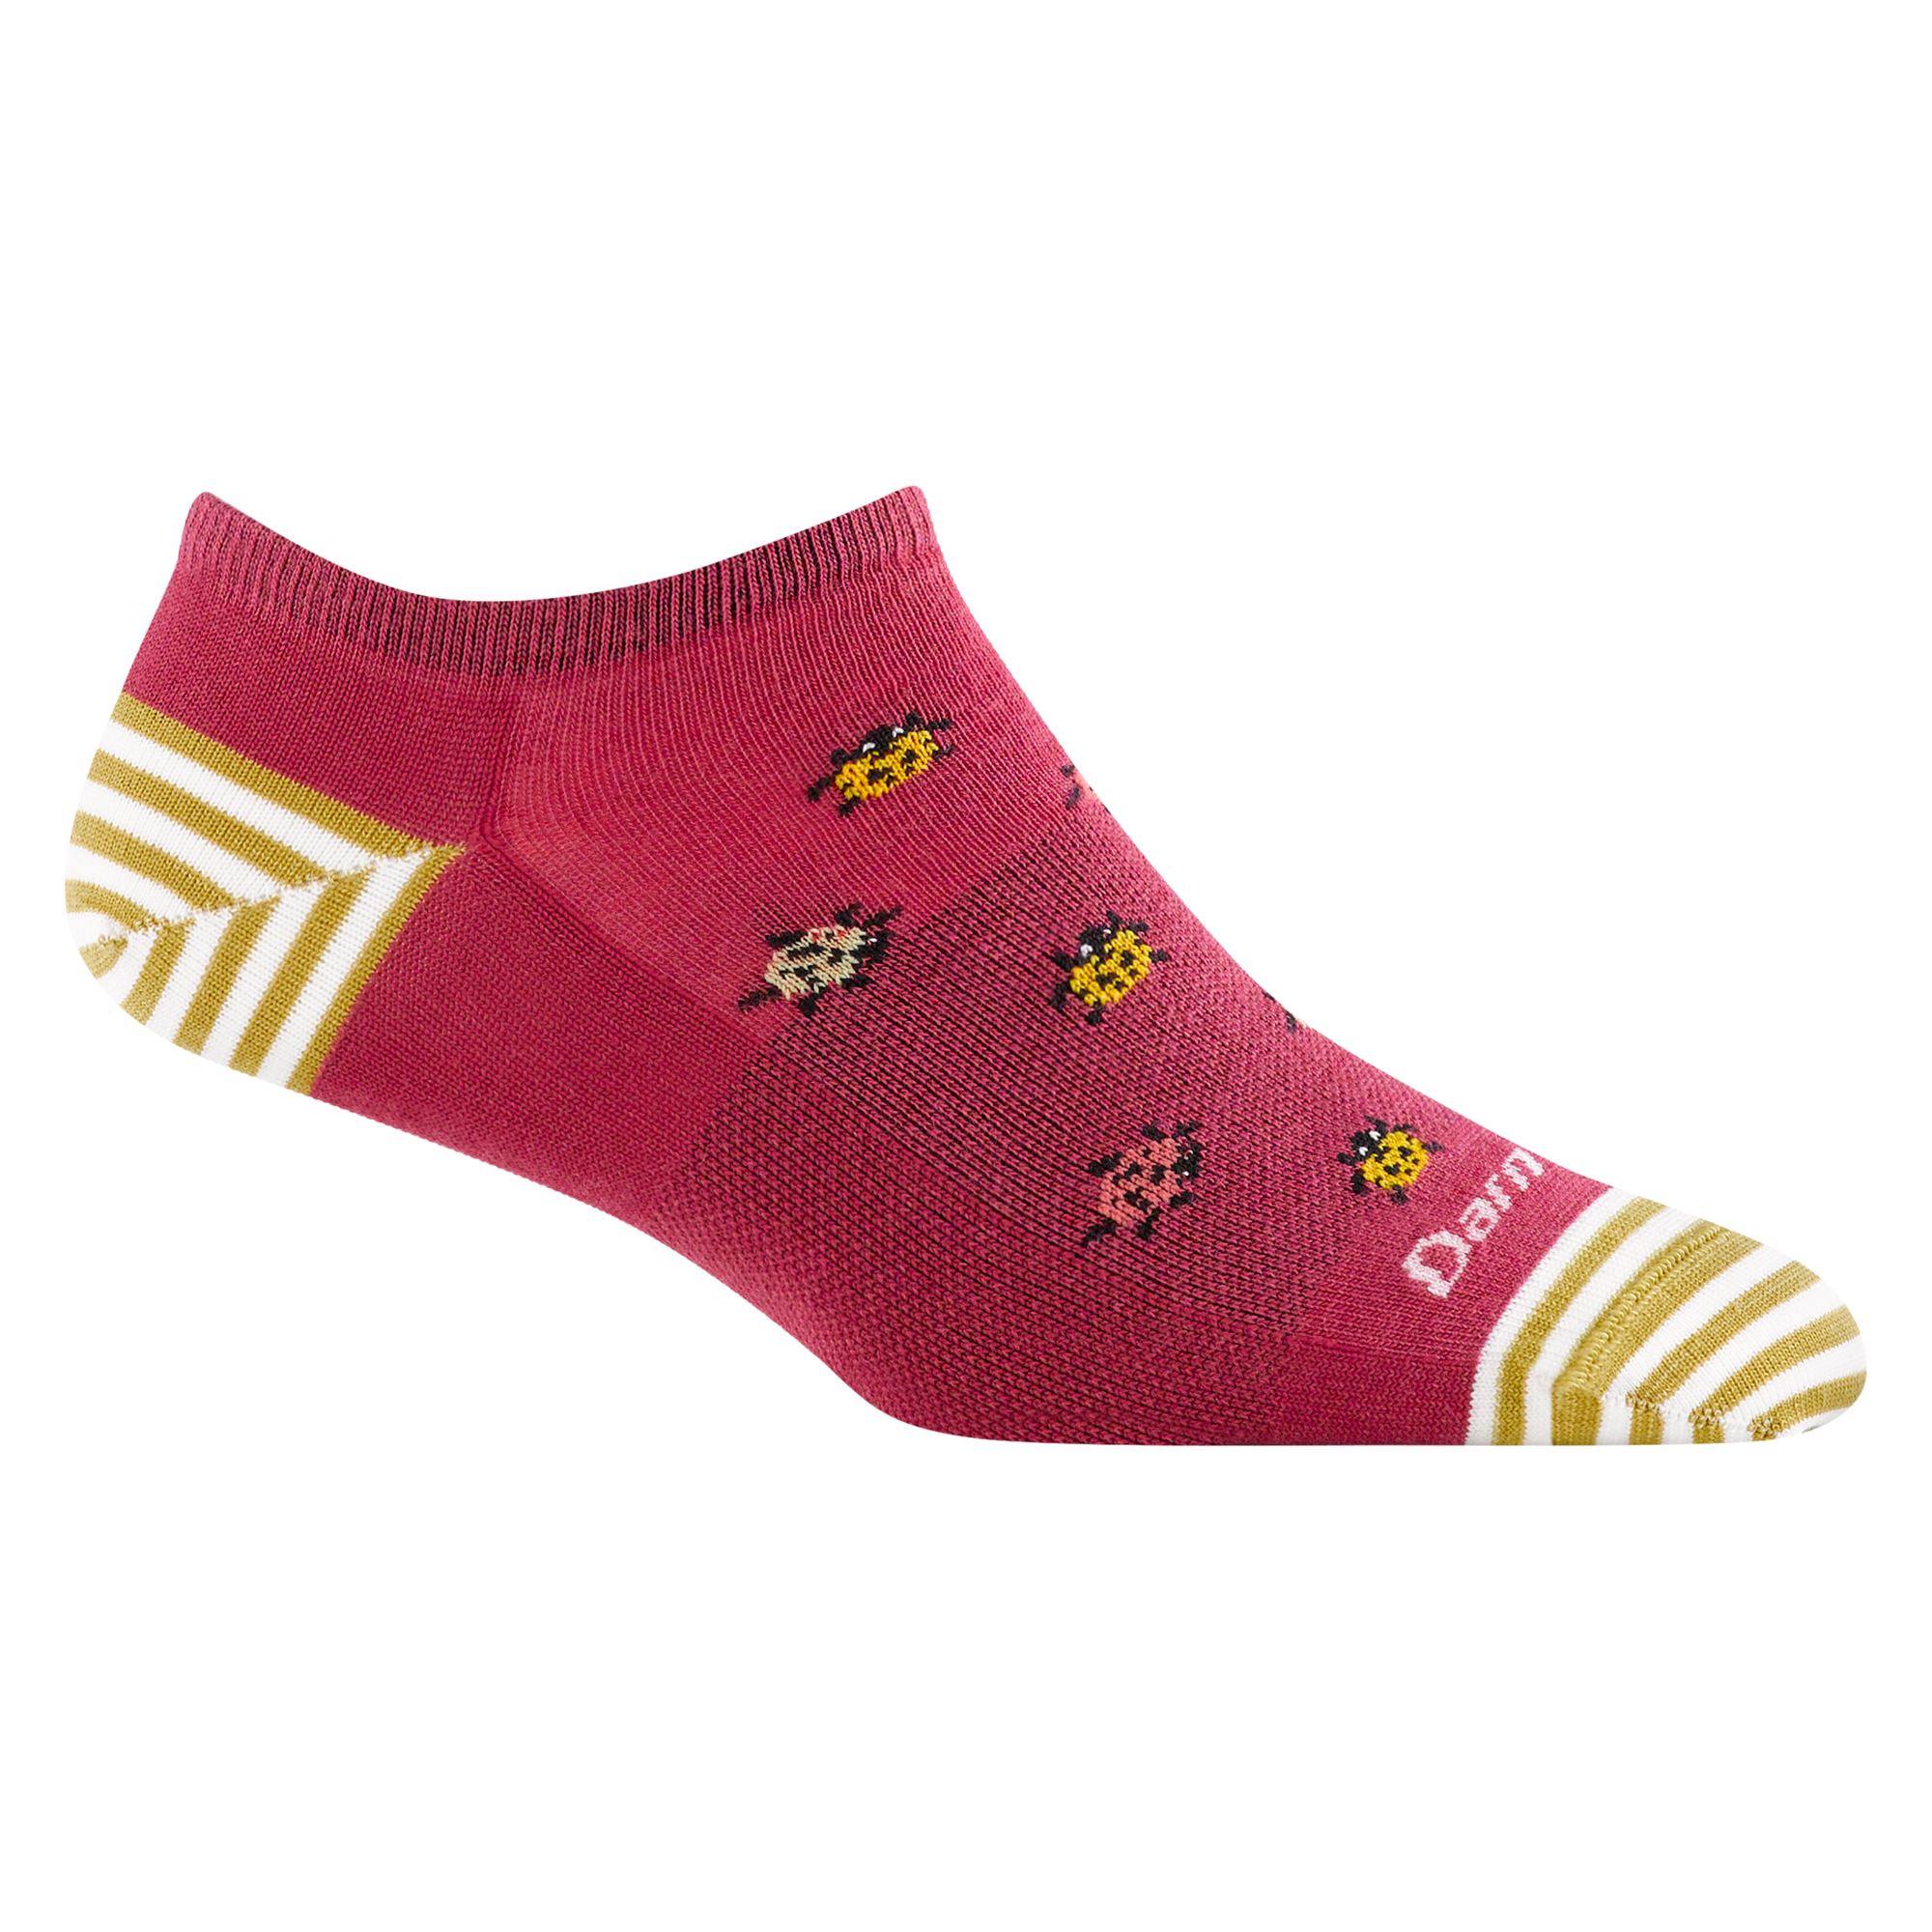 6074 Lucky lady in cranberry featuring and white and yellow striped heel/toe , berry red body and ladybug design